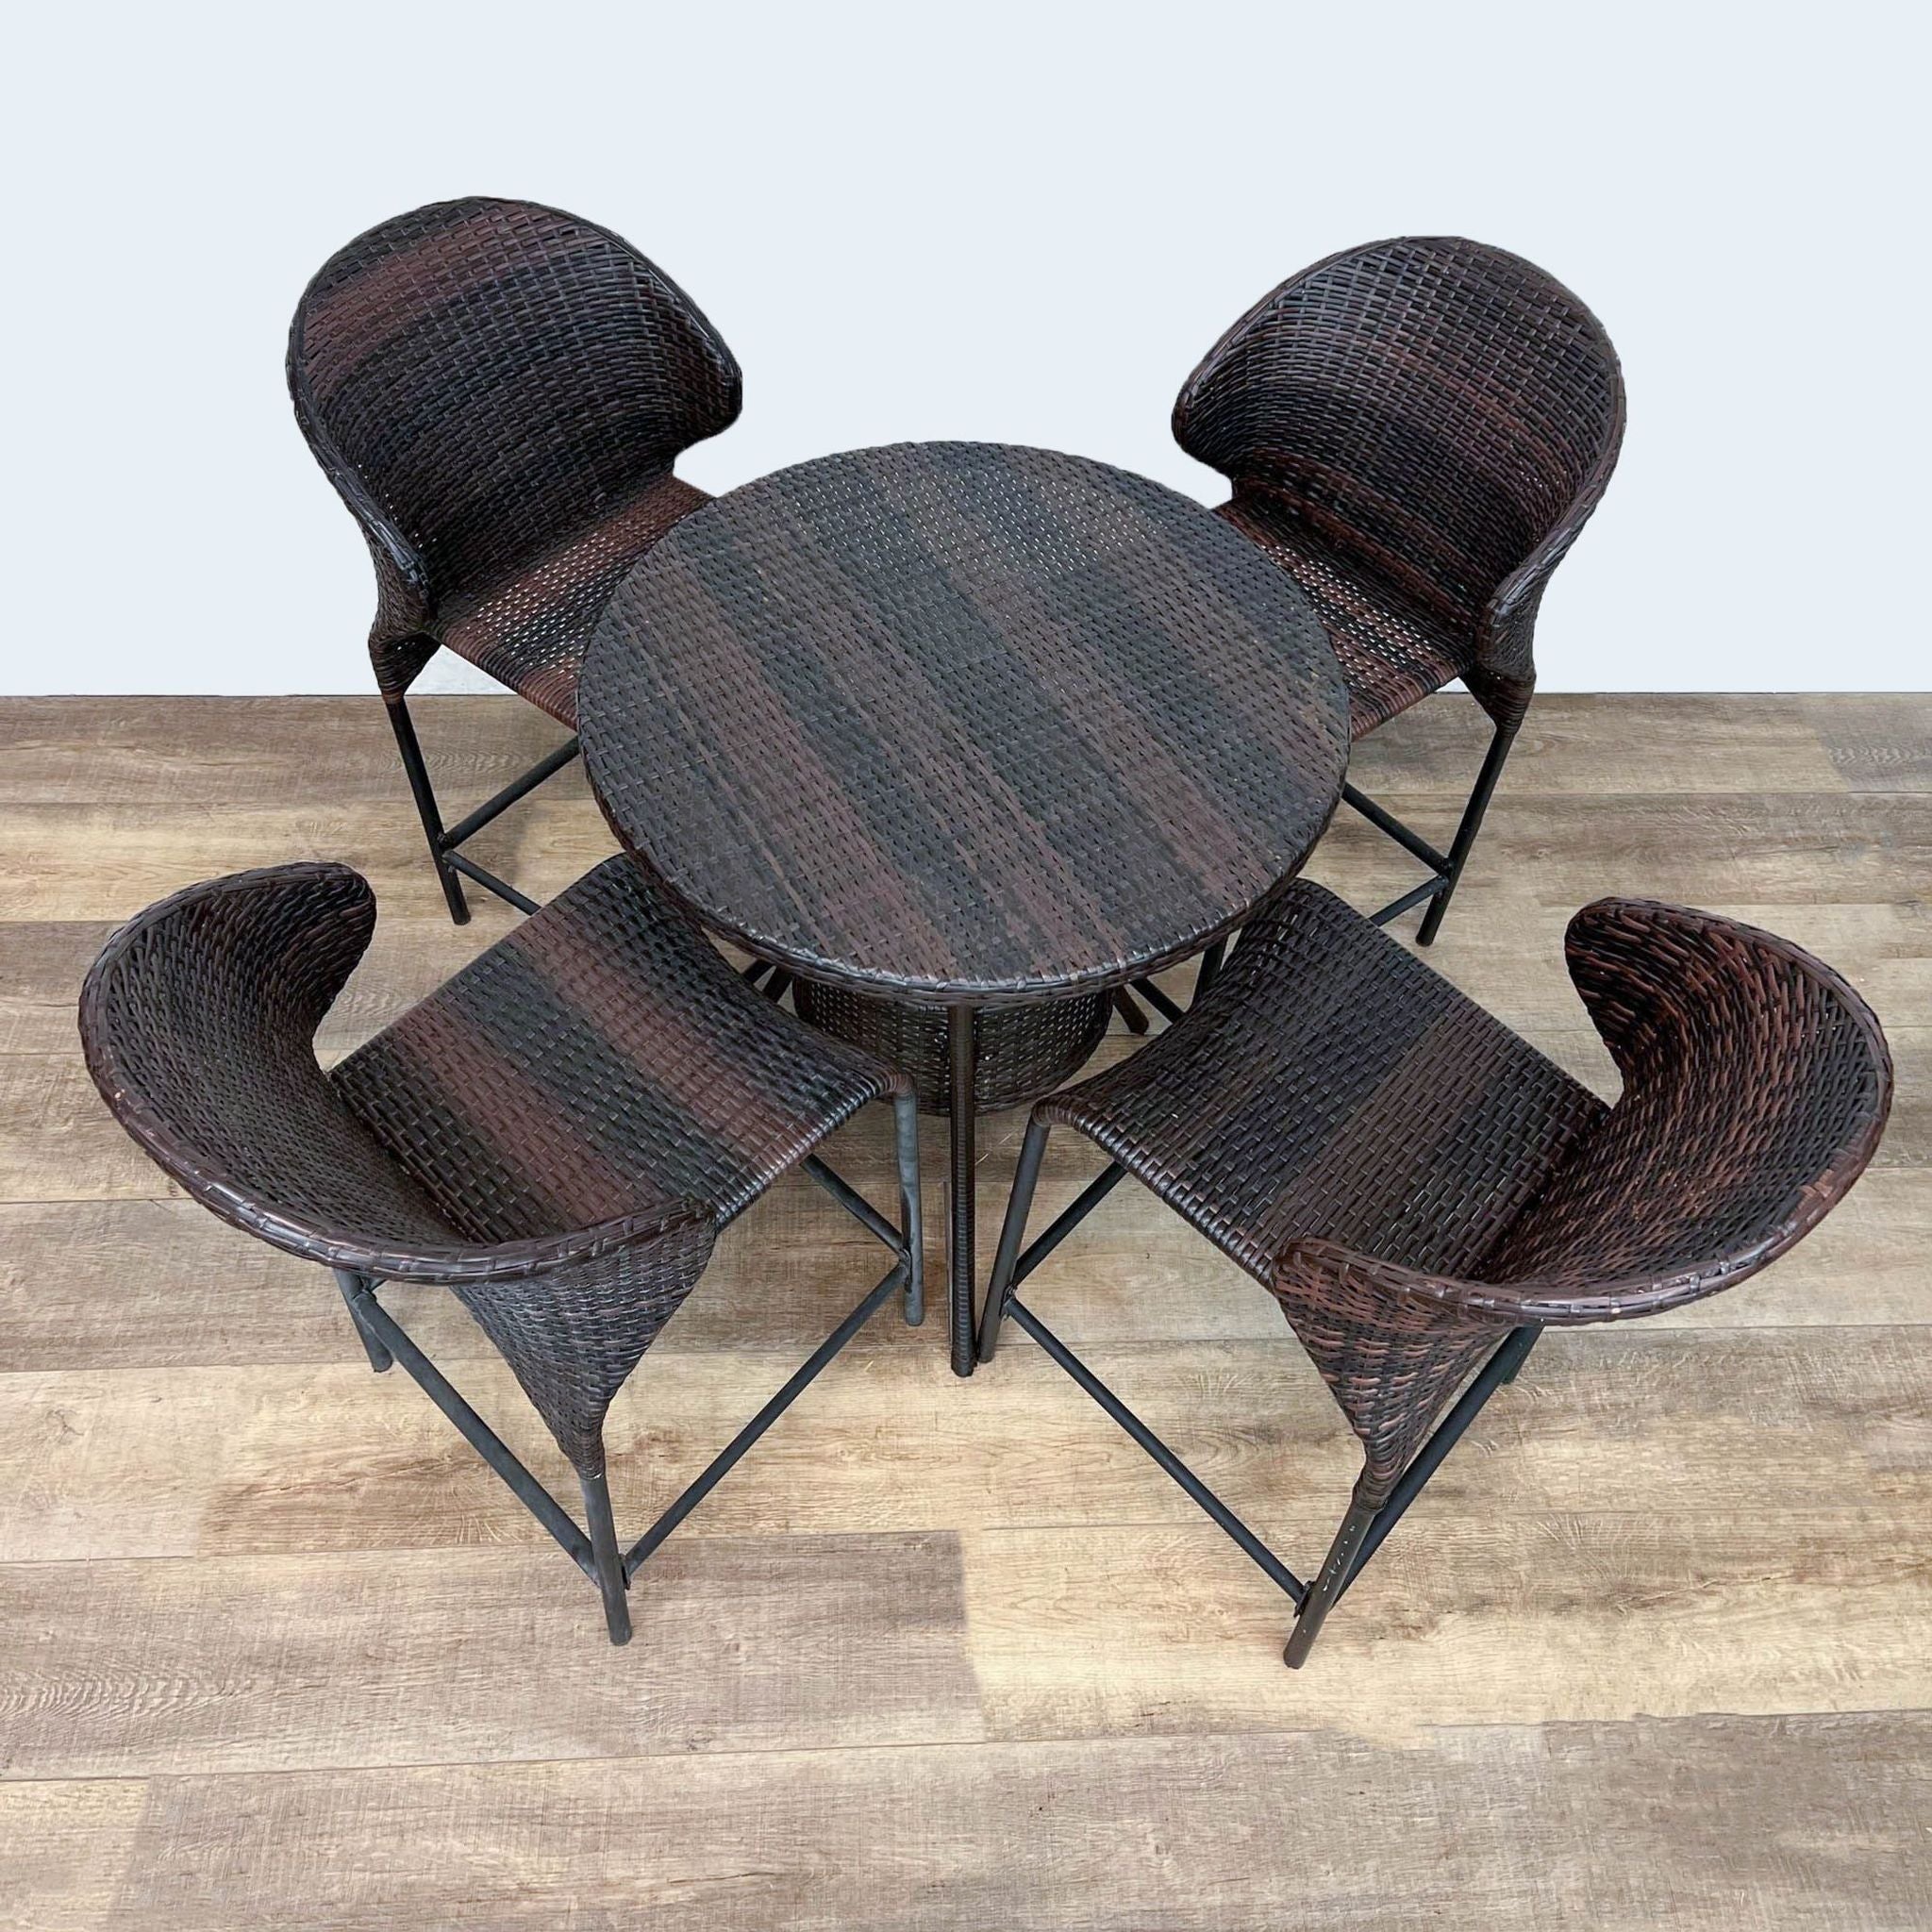 Round resin wicker table set by Reperch with four chairs, viewed from above, showcasing the set's compact design.